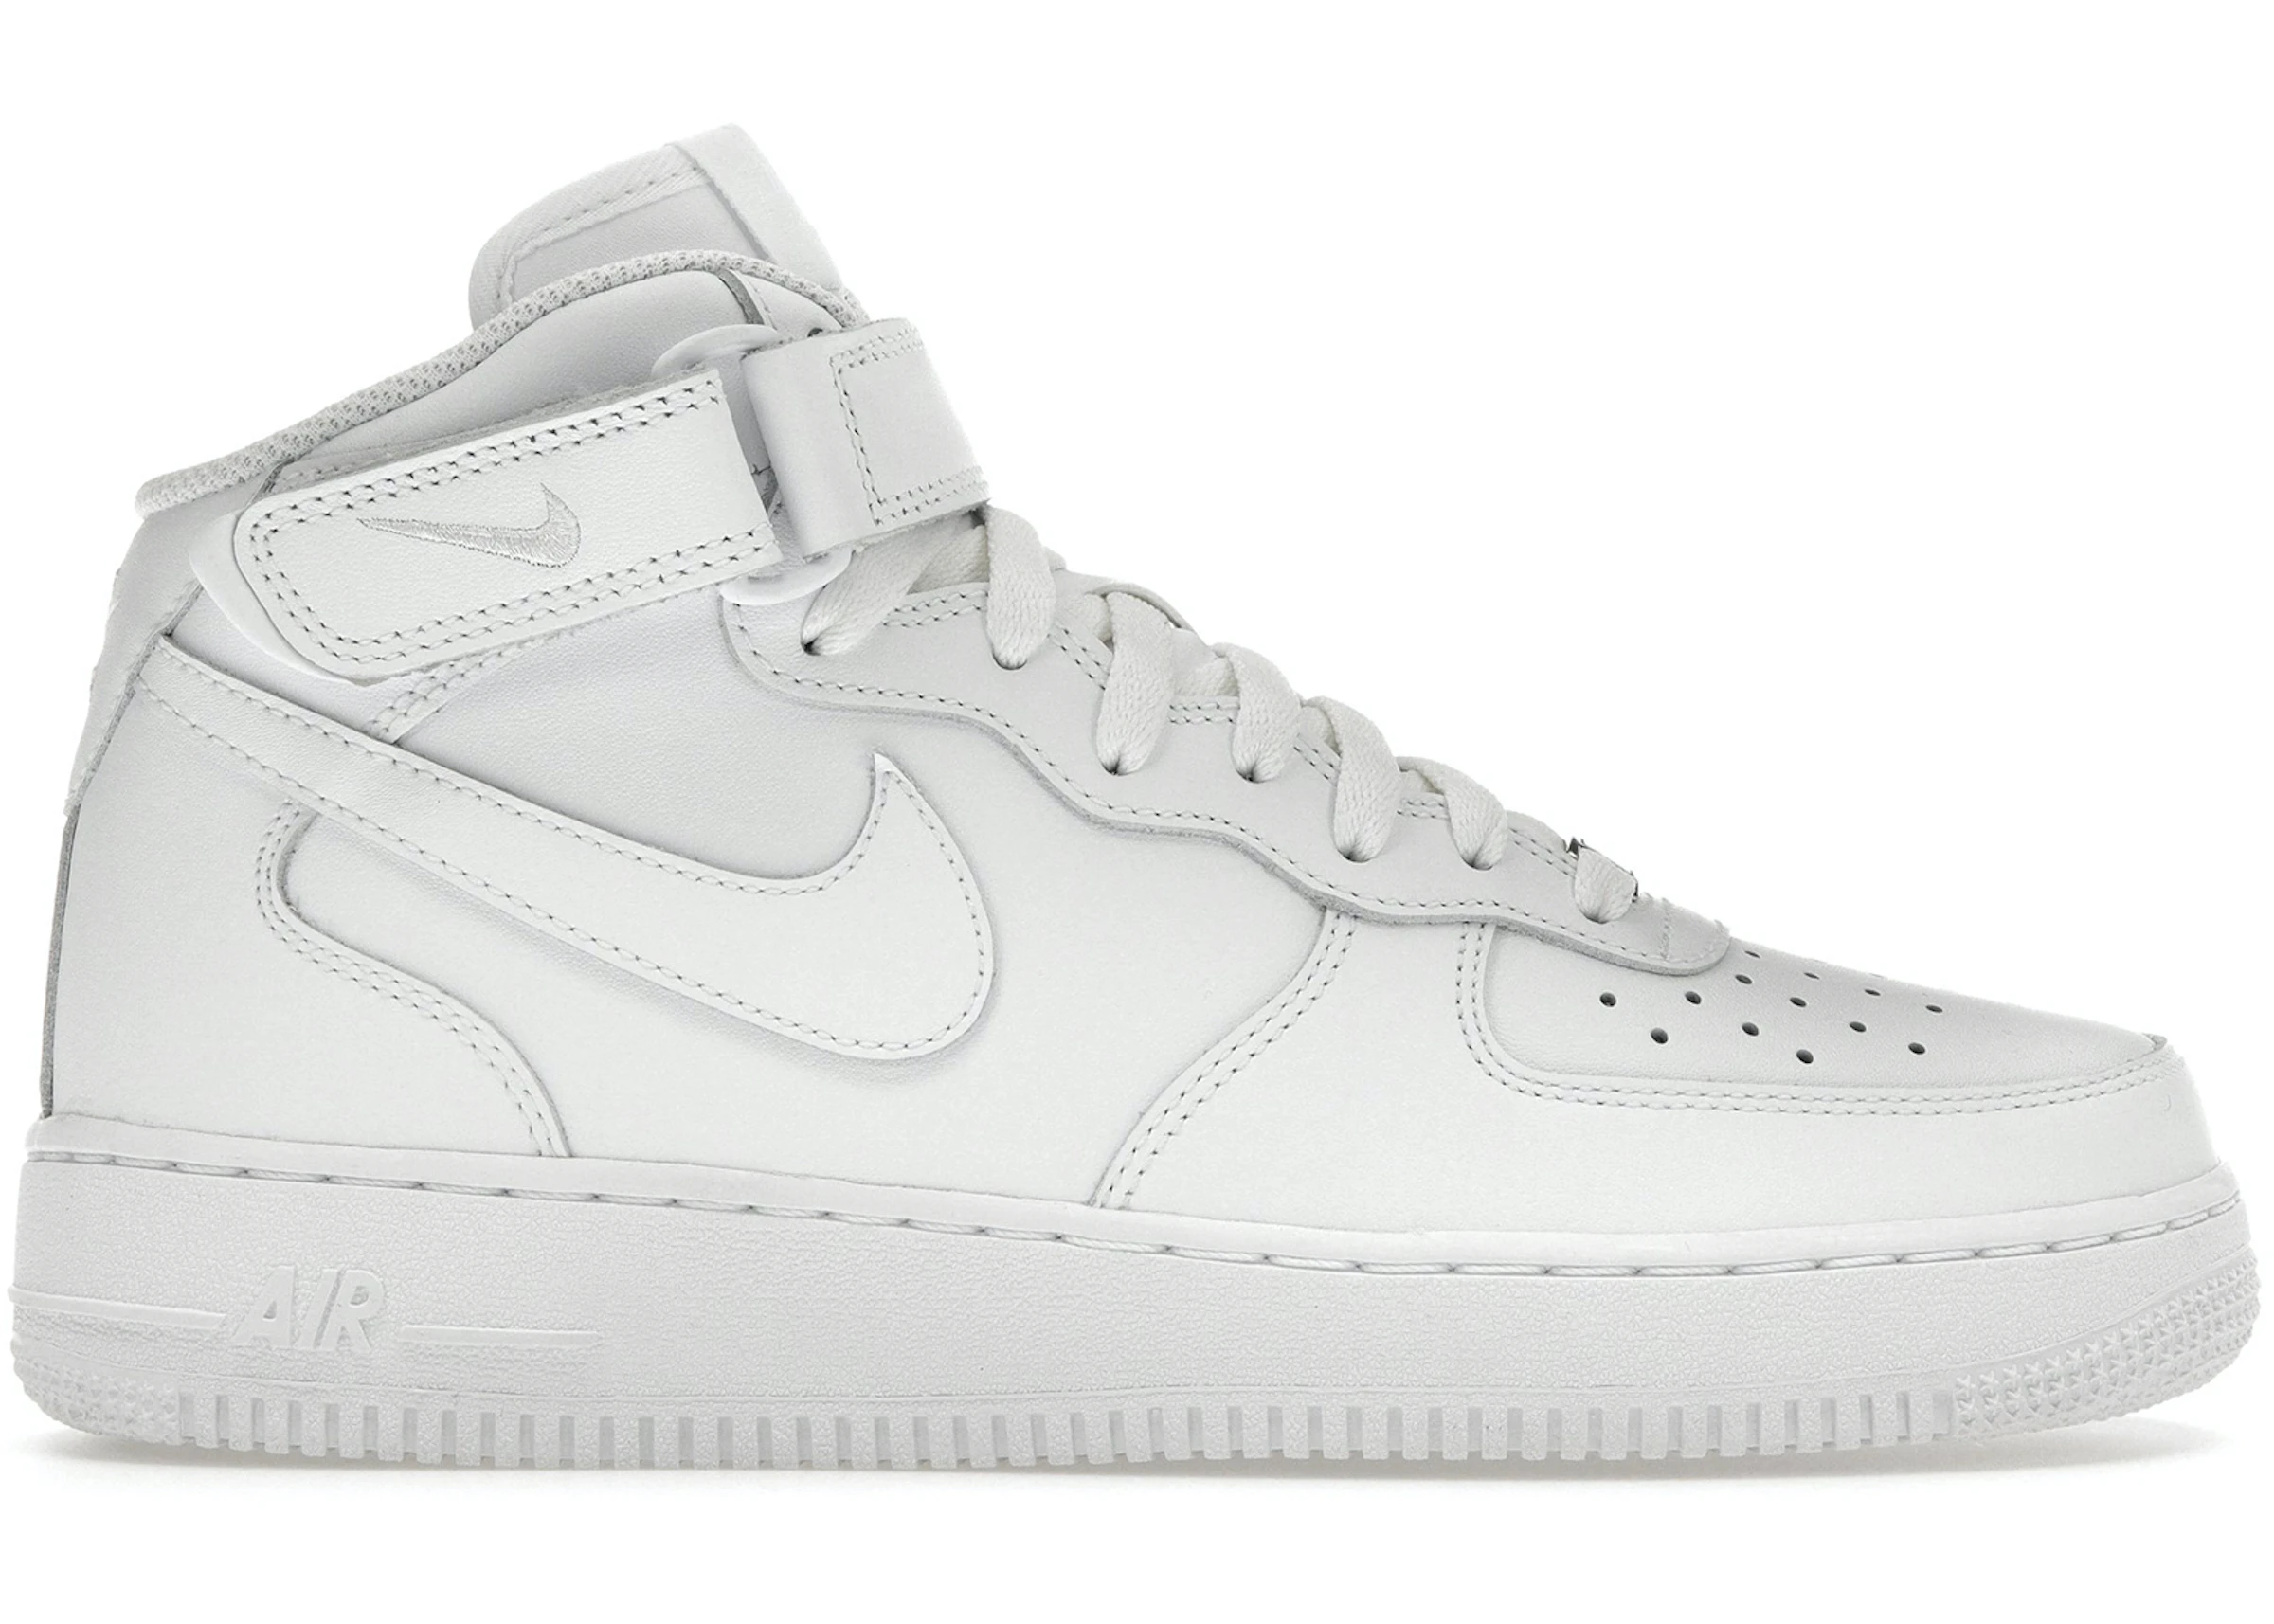 scratch Air conditioner cushion Nike Air Force 1 Mid White '07 - 315123-111/CW2289-111 - US